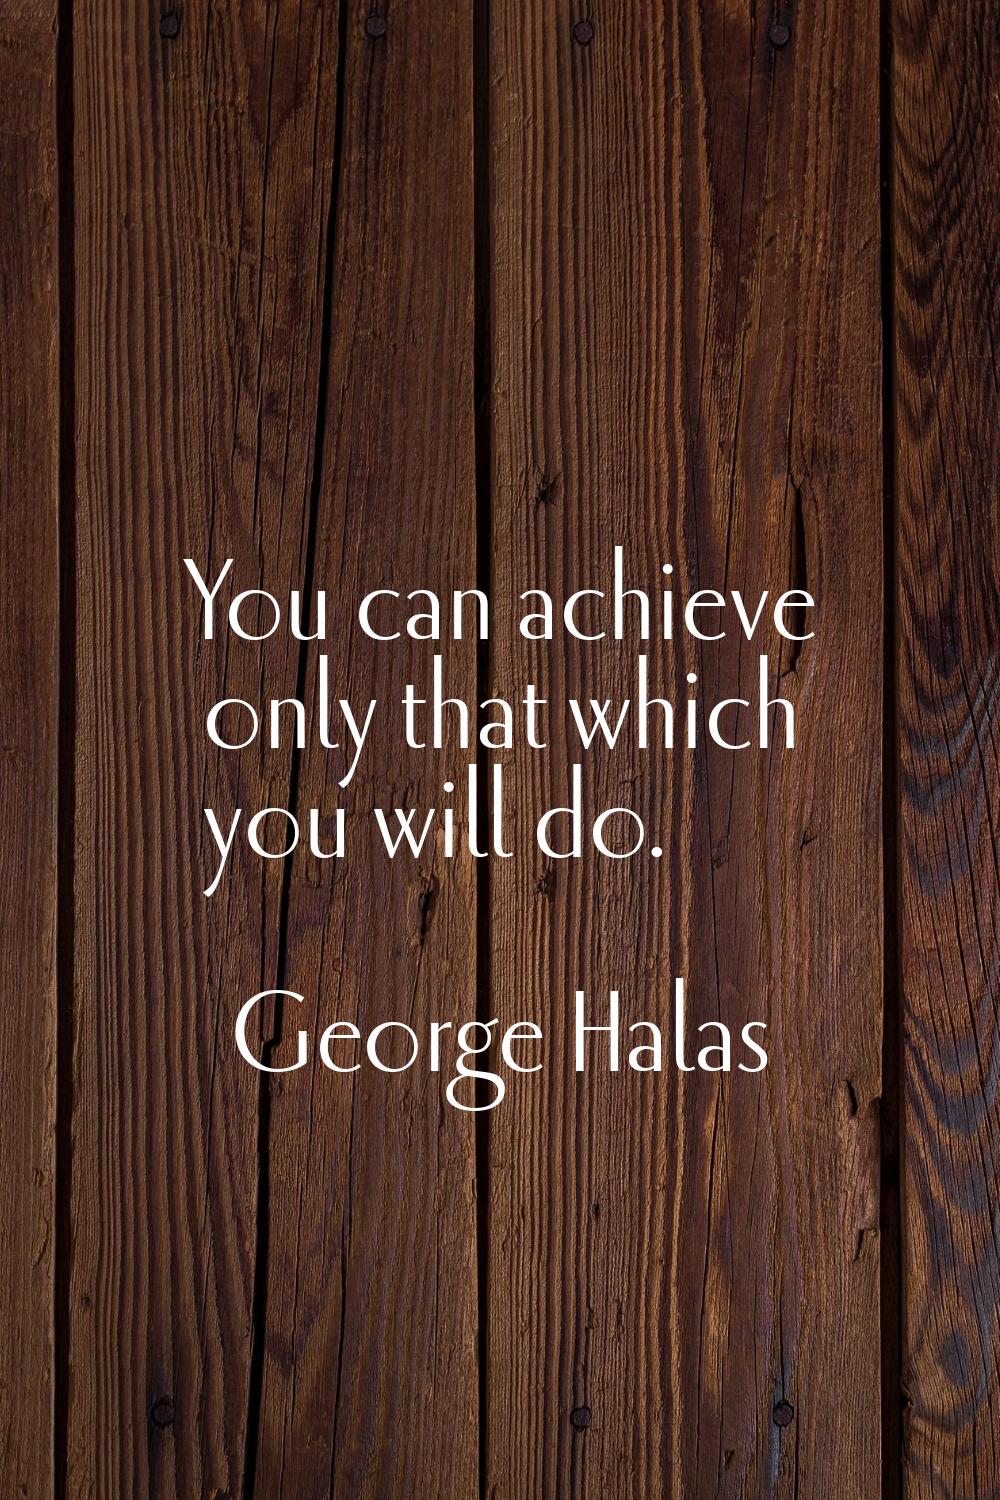 You can achieve only that which you will do.